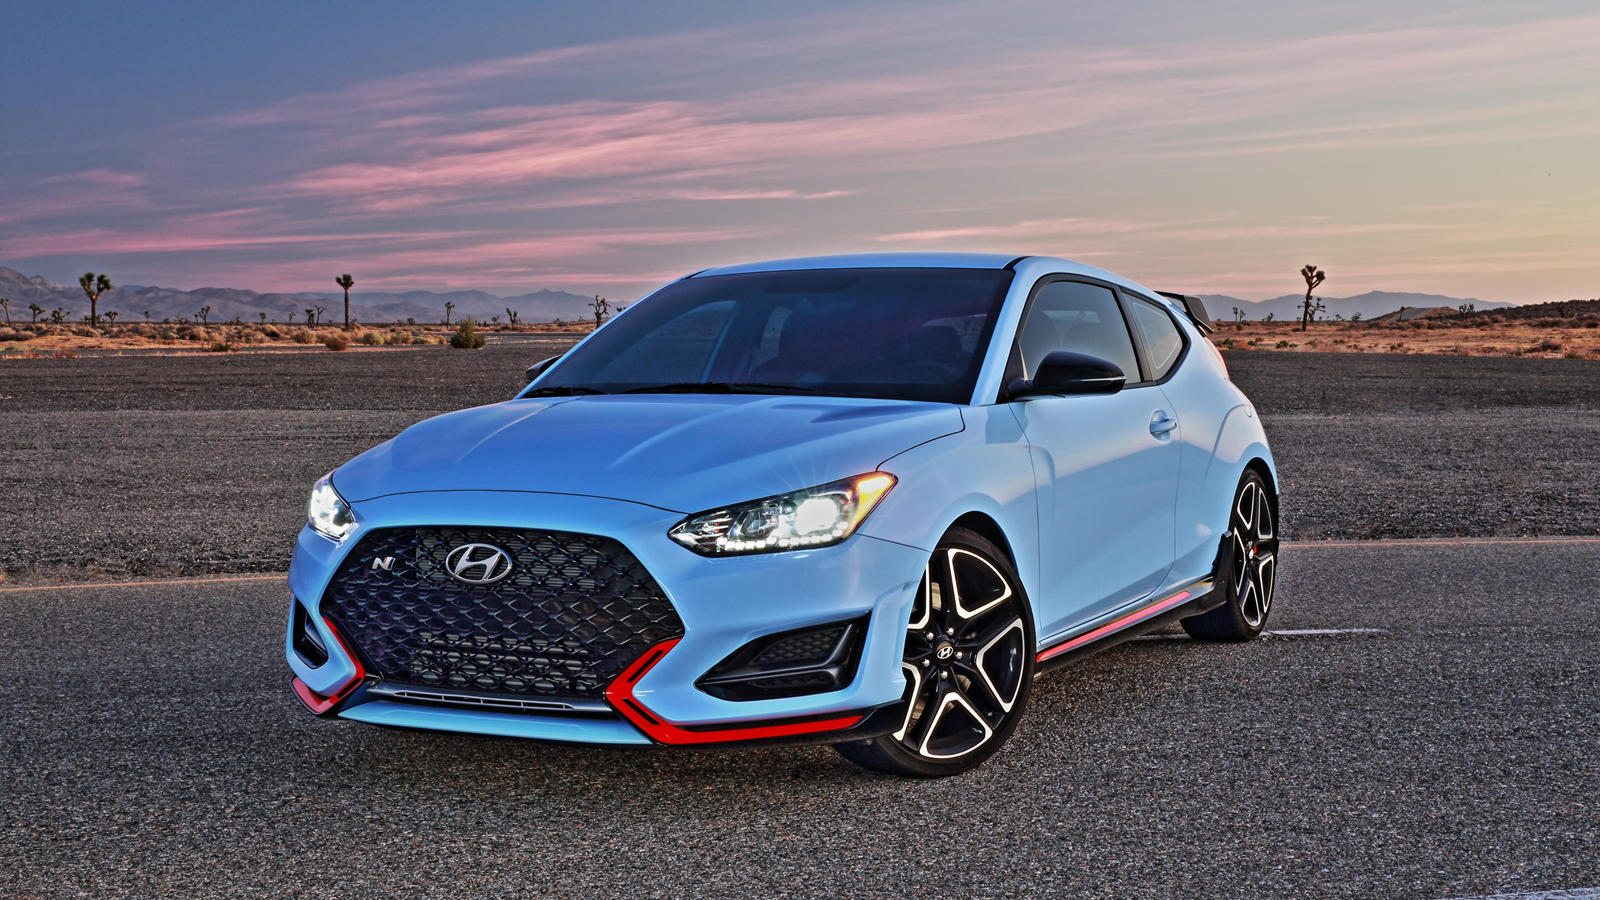 2022 Hyundai Veloster N Review, Pricing | Veloster N Hatchback Models |  CarBuzz